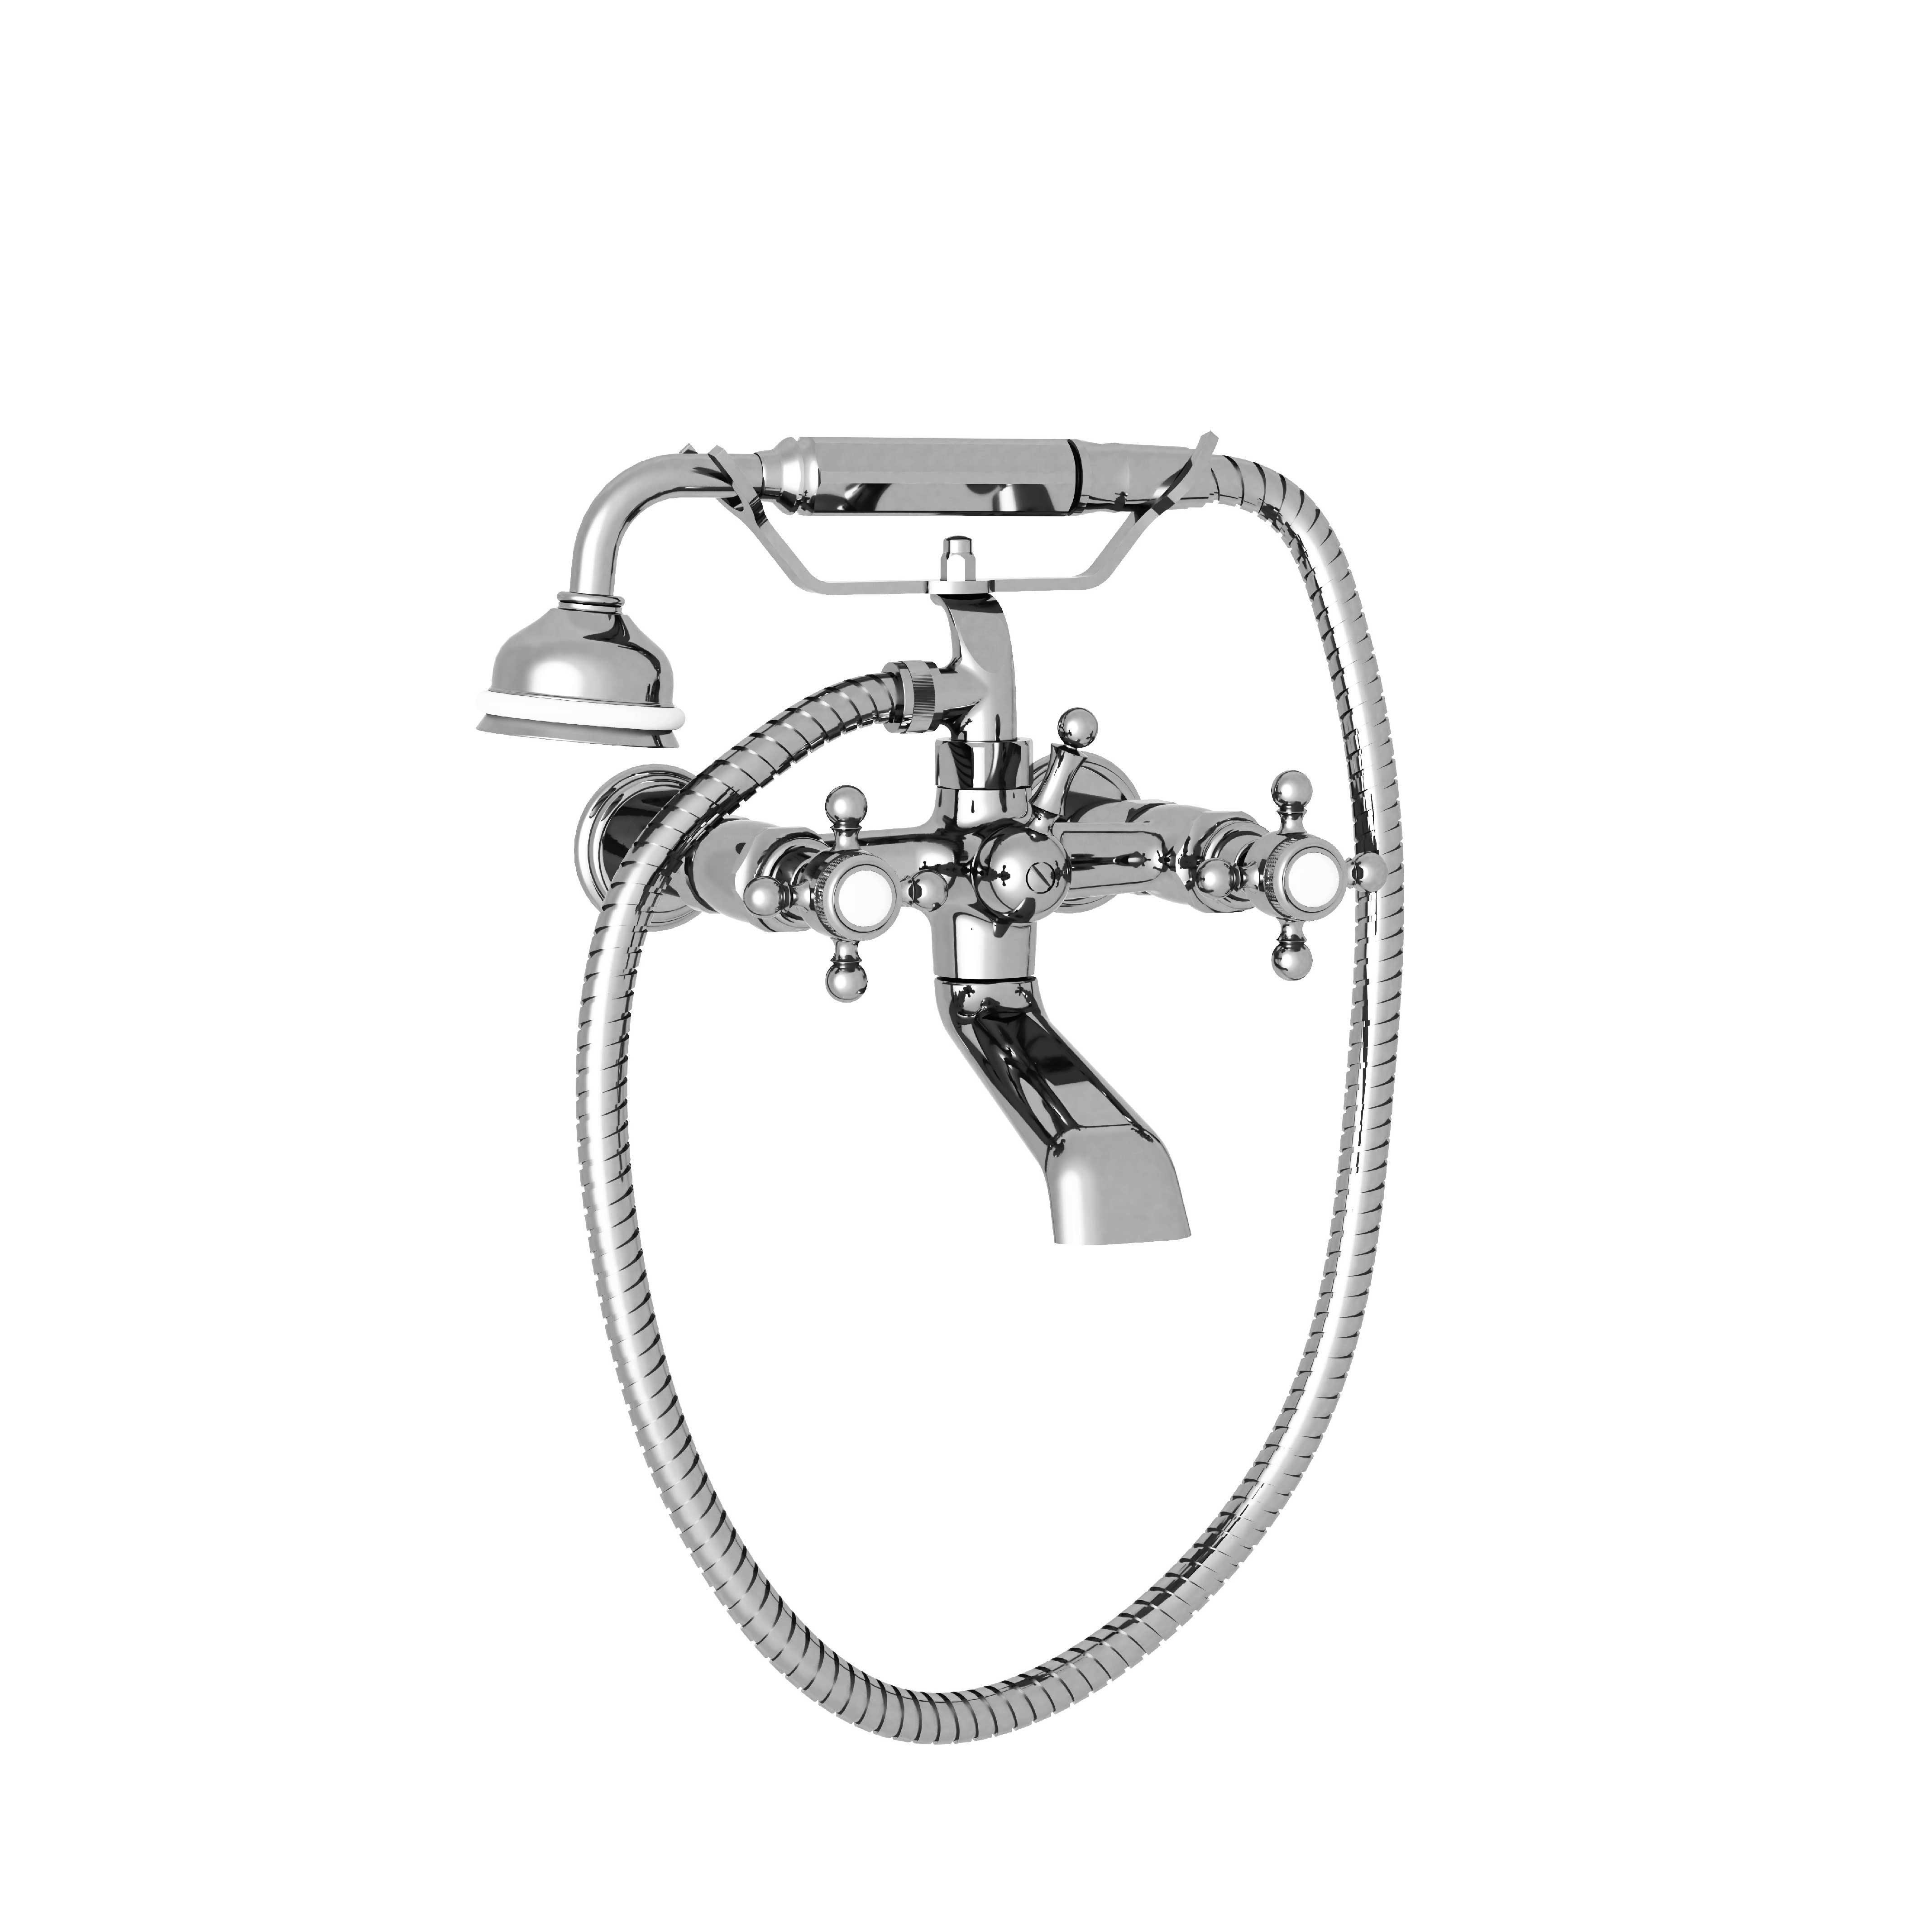 M30-3201 Wall mounted bath and shower mixer